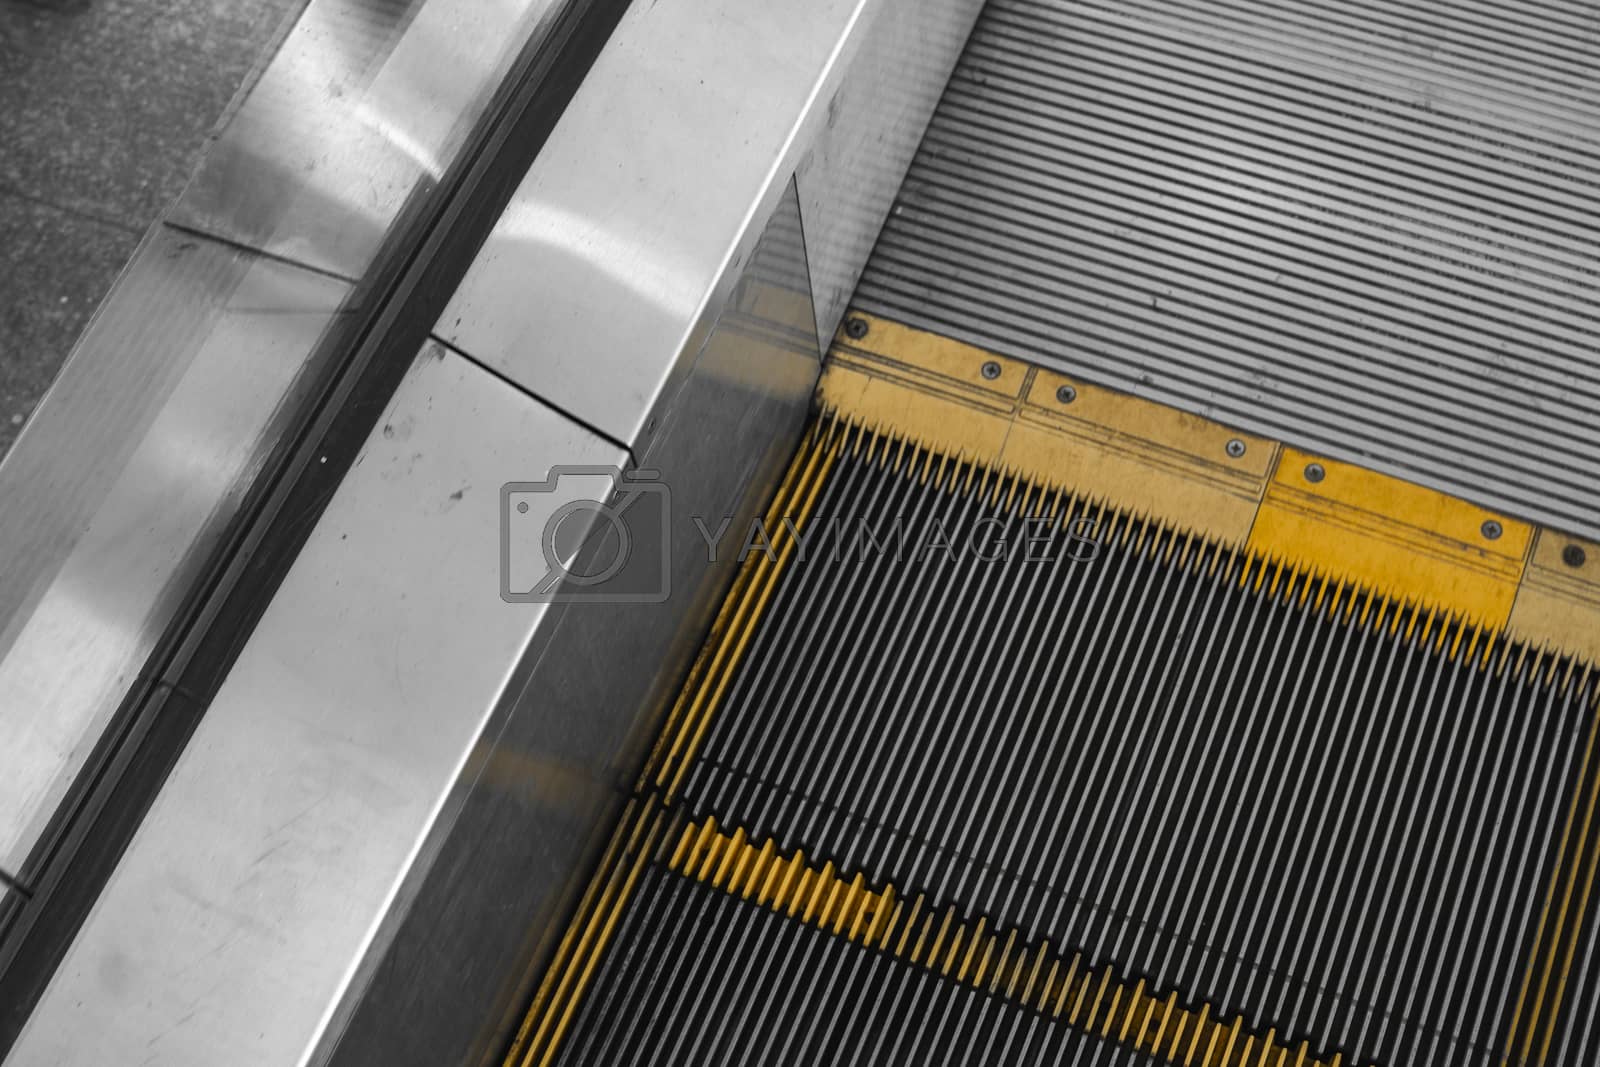 Royalty free image of Ditry stairs on Escalator with yellow strips. by vovsht